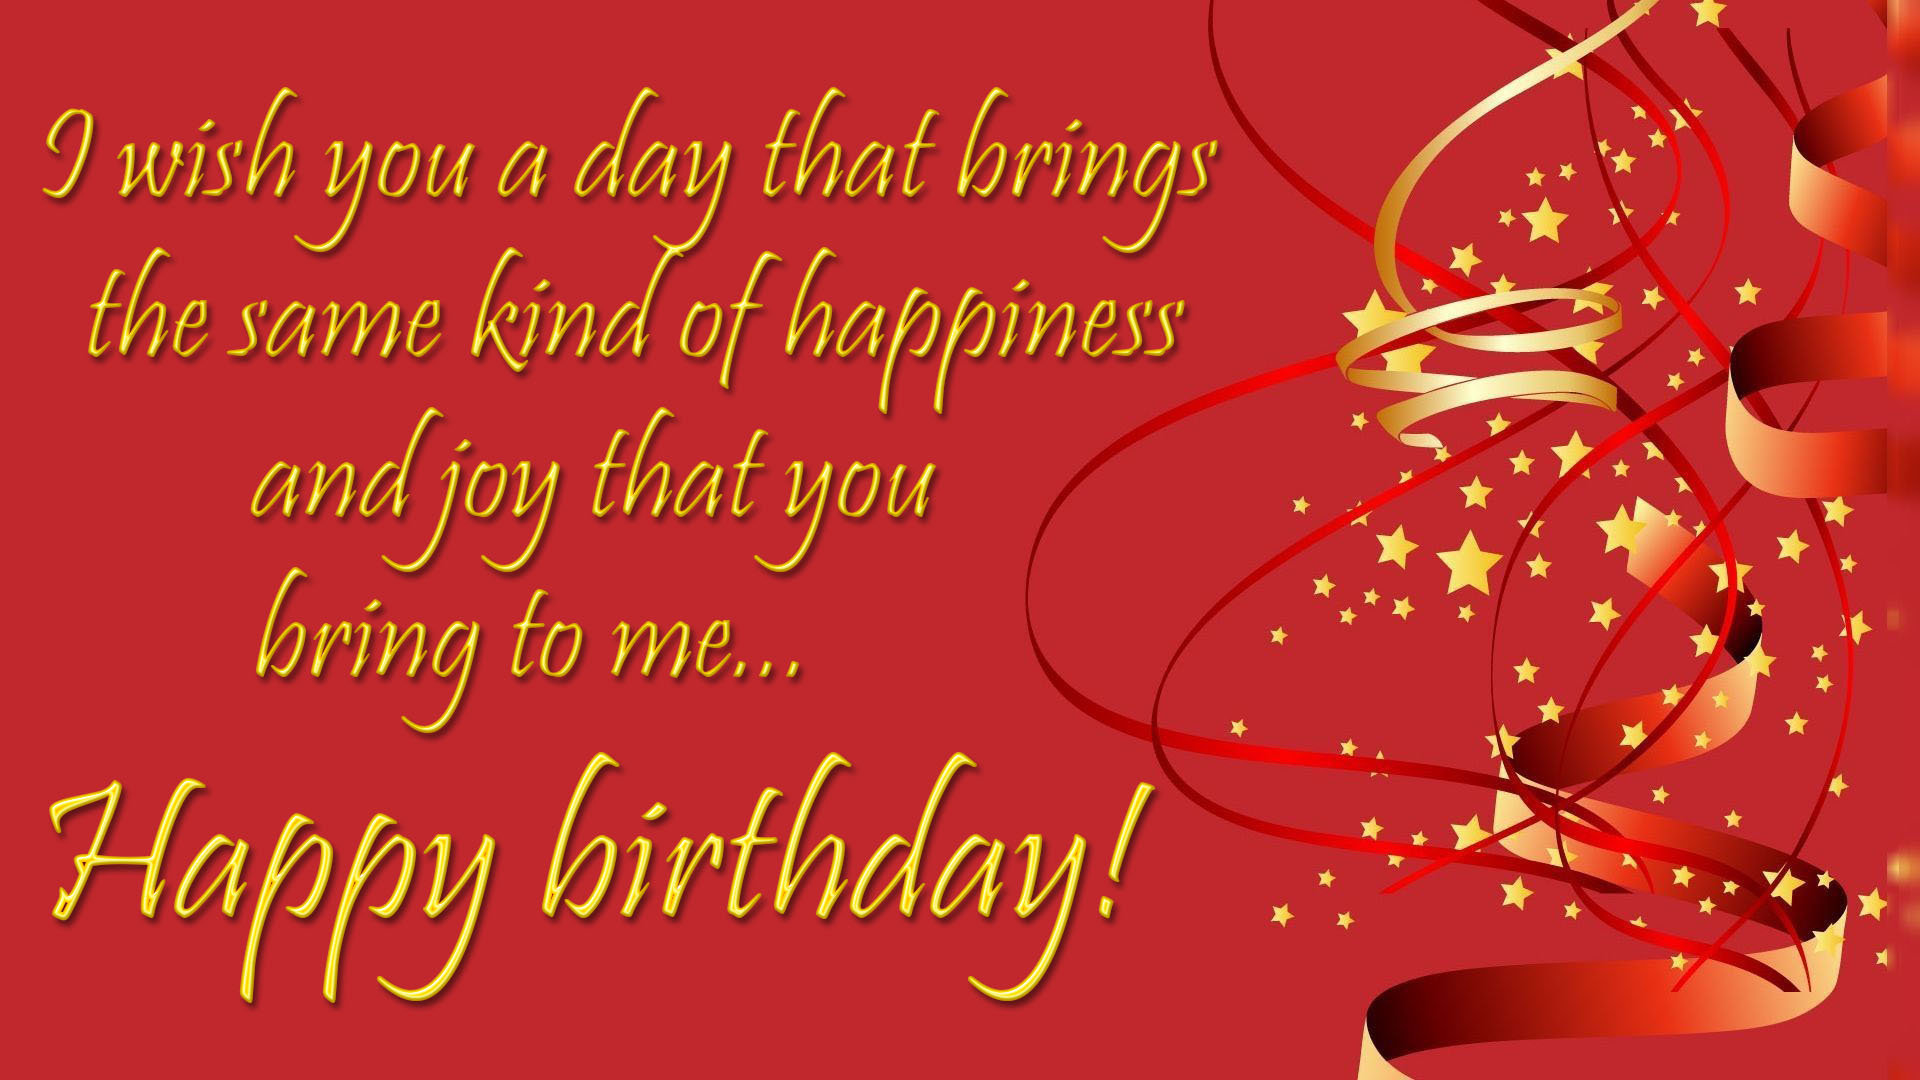 lovely wish for birthday image